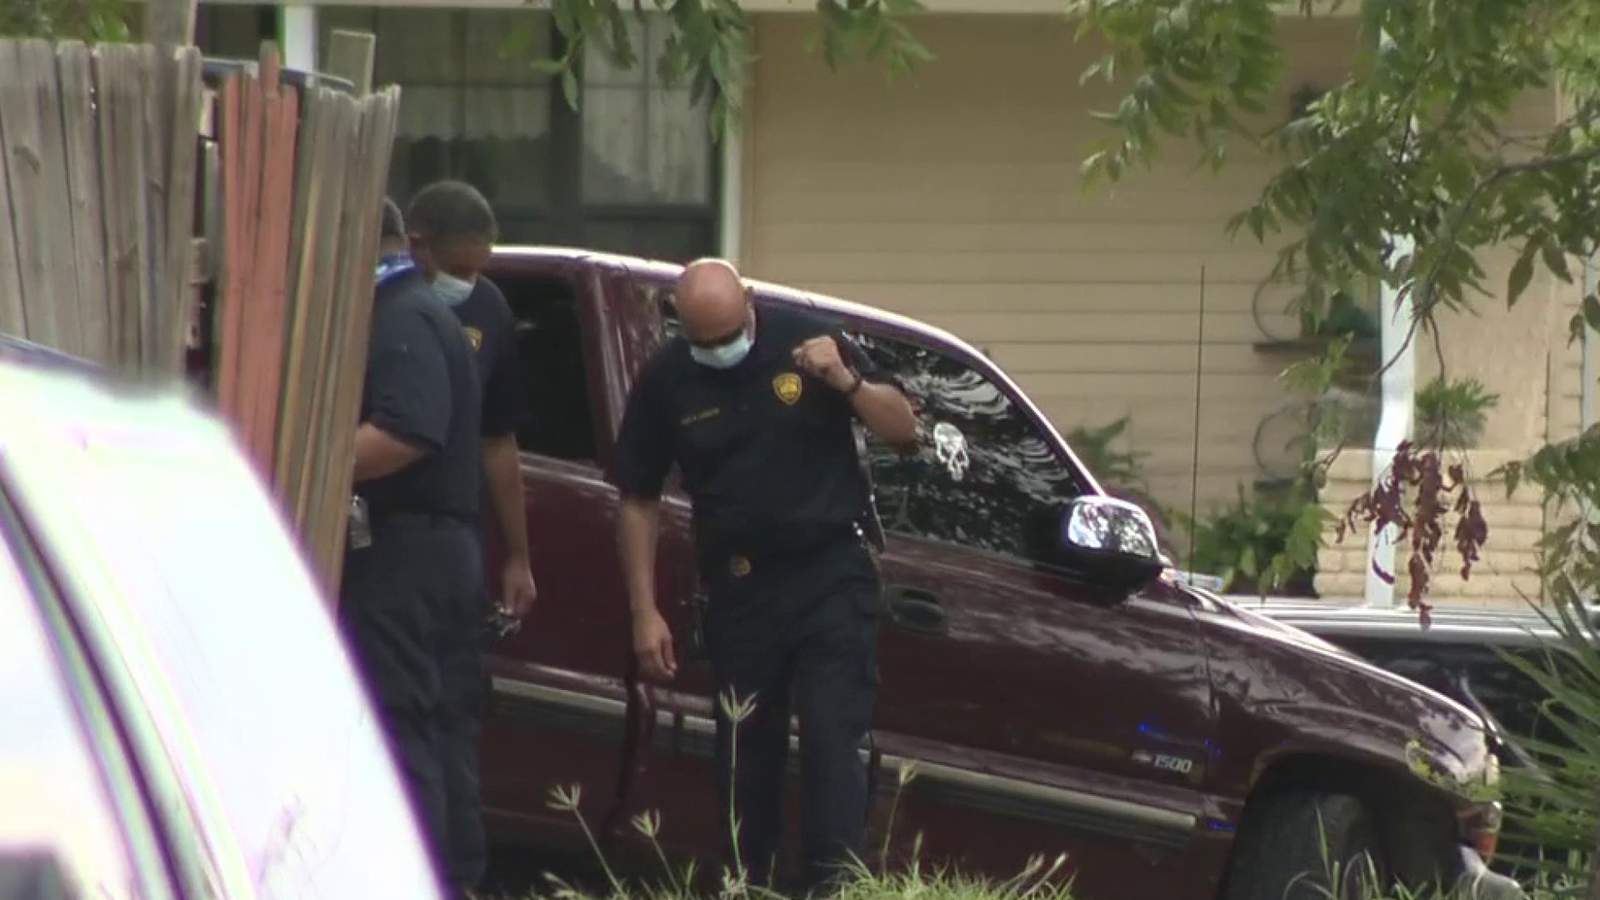 Records: Man shot, killed by San Antonio police was reported to authorities by ex-girlfriend several times